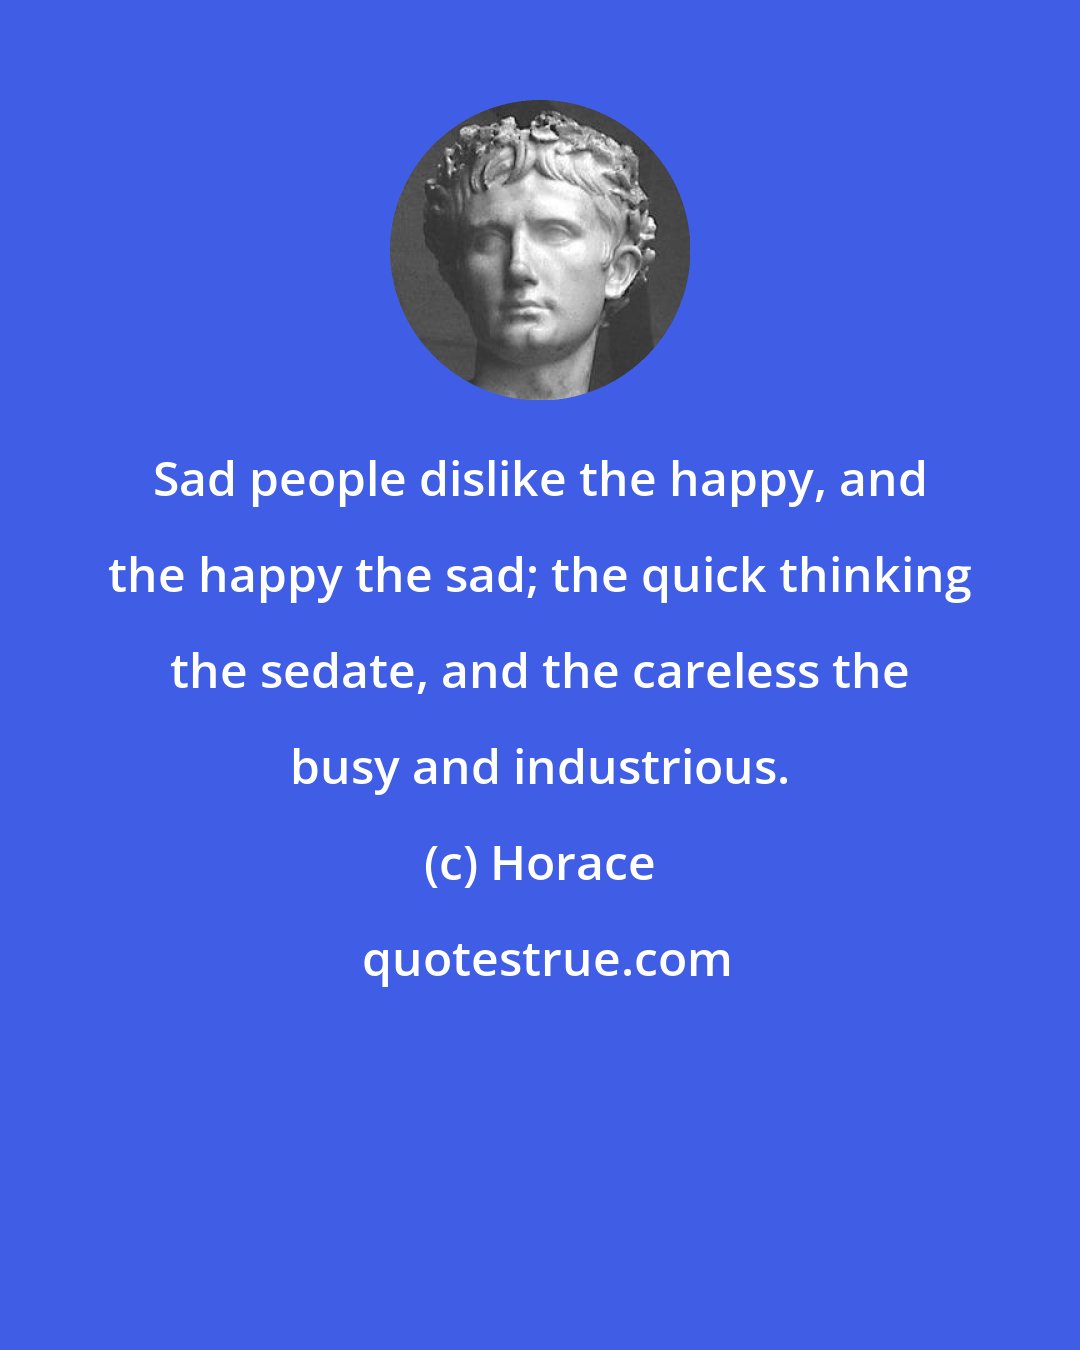 Horace: Sad people dislike the happy, and the happy the sad; the quick thinking the sedate, and the careless the busy and industrious.